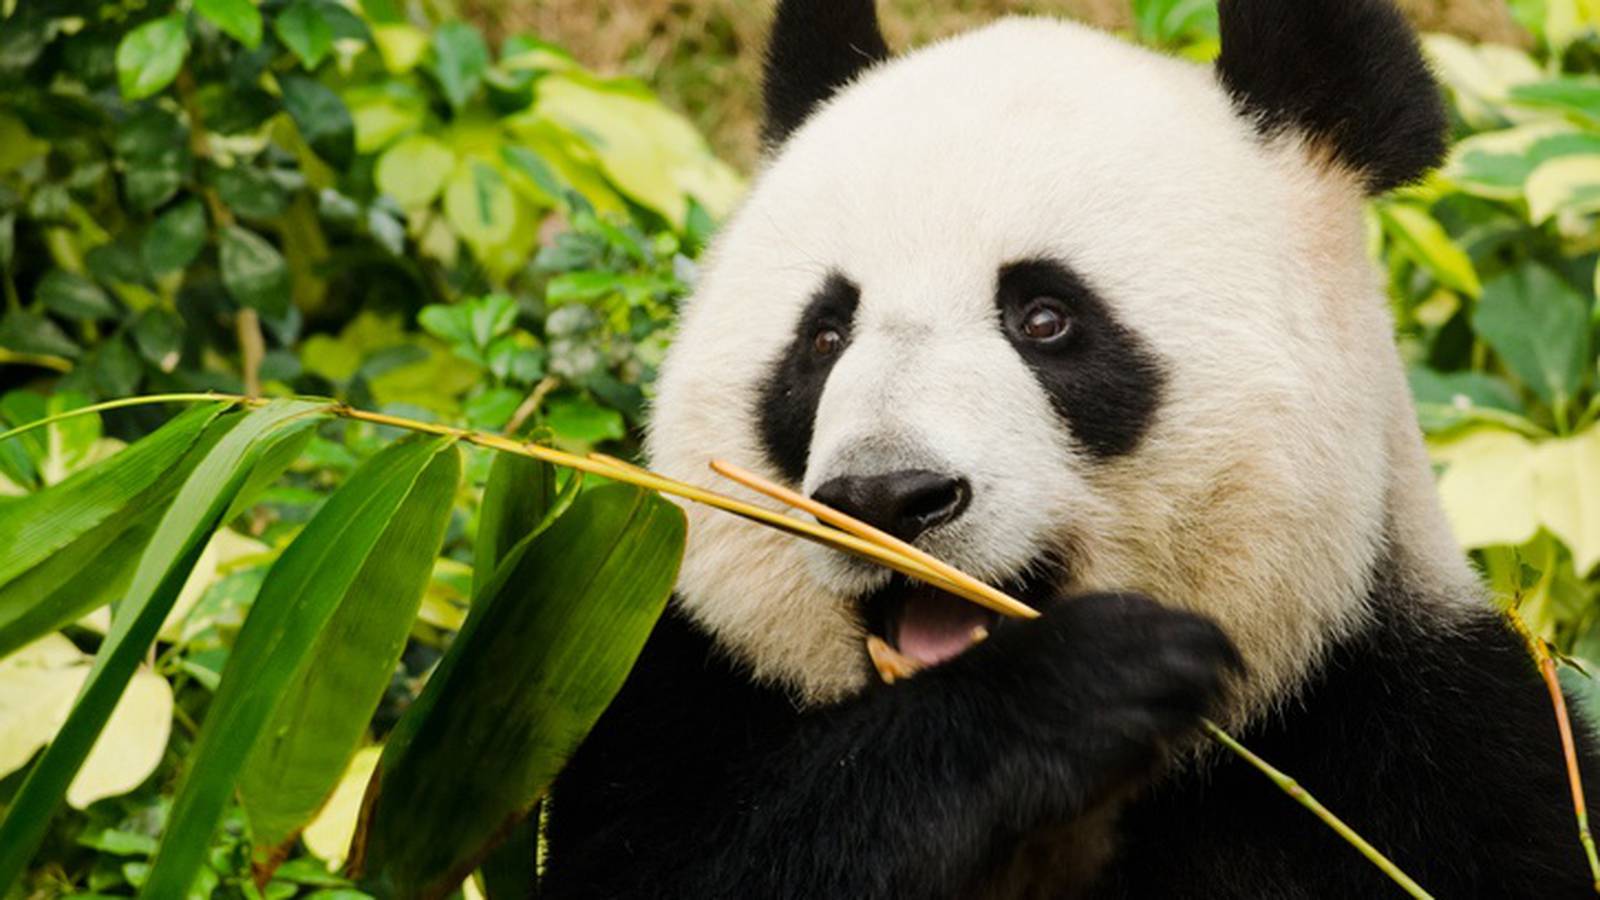 Giant pandas no longer endangered in the wild, China announces – The Irish  Times